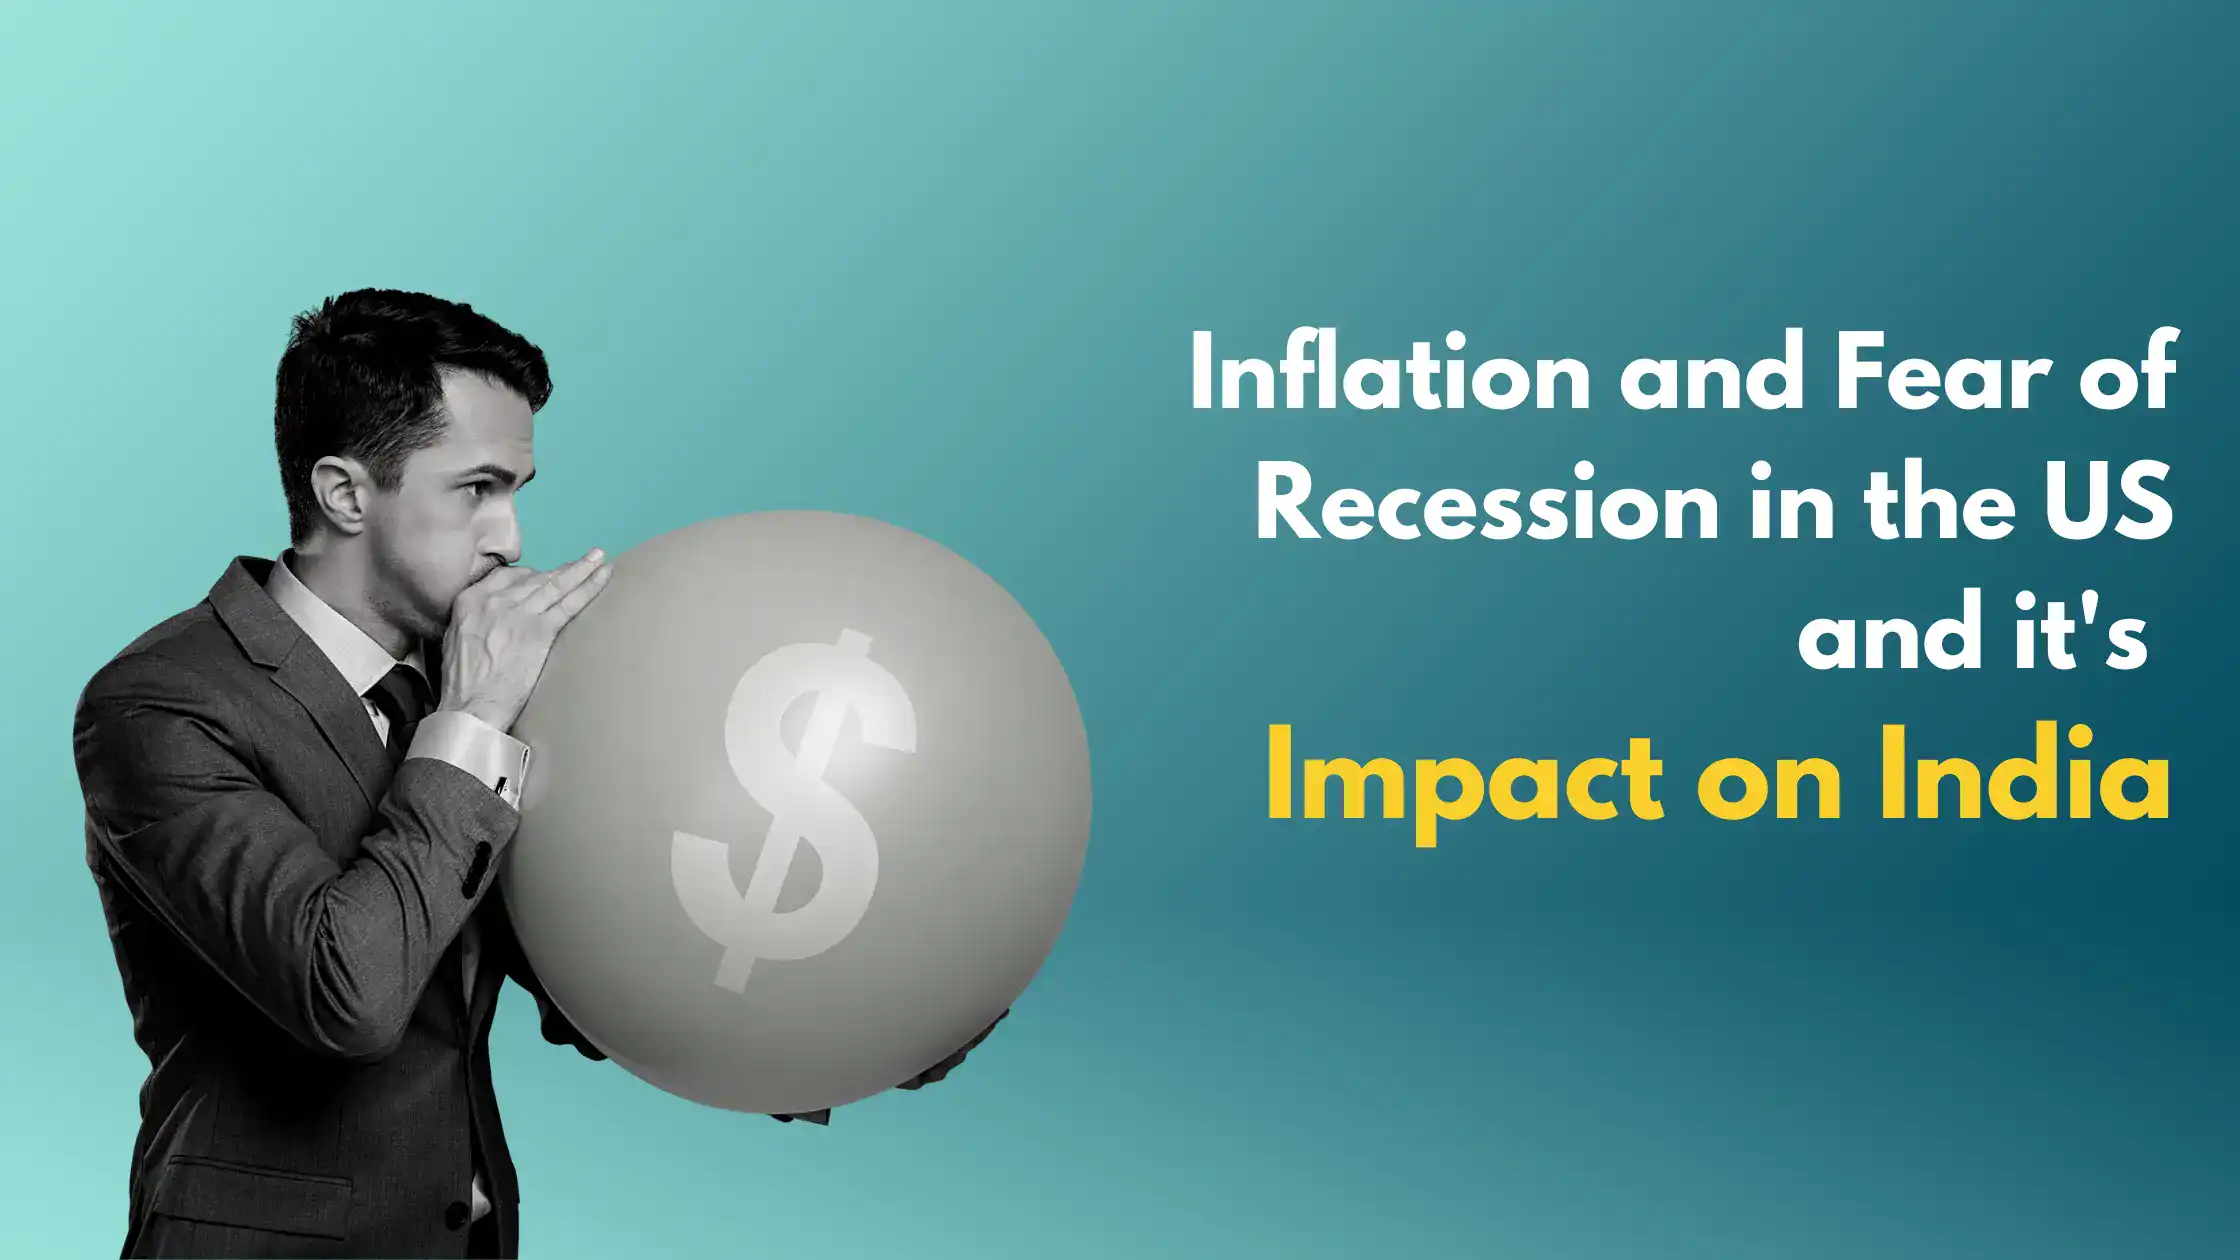 Inflation and Fear of Recession in the US and Impact on India